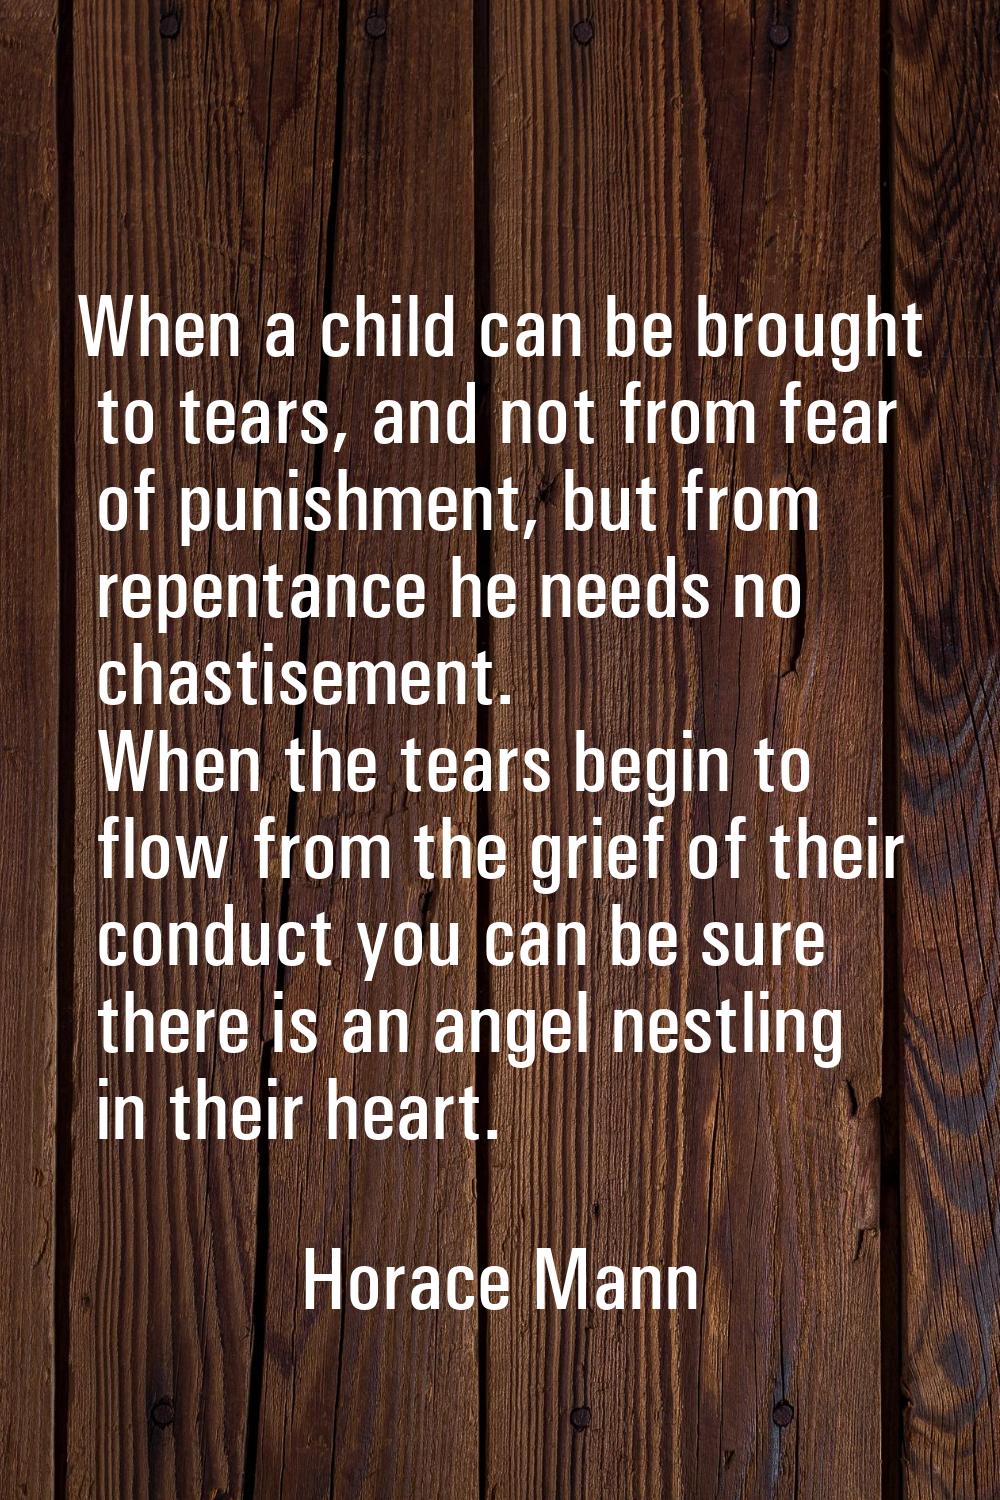 When a child can be brought to tears, and not from fear of punishment, but from repentance he needs